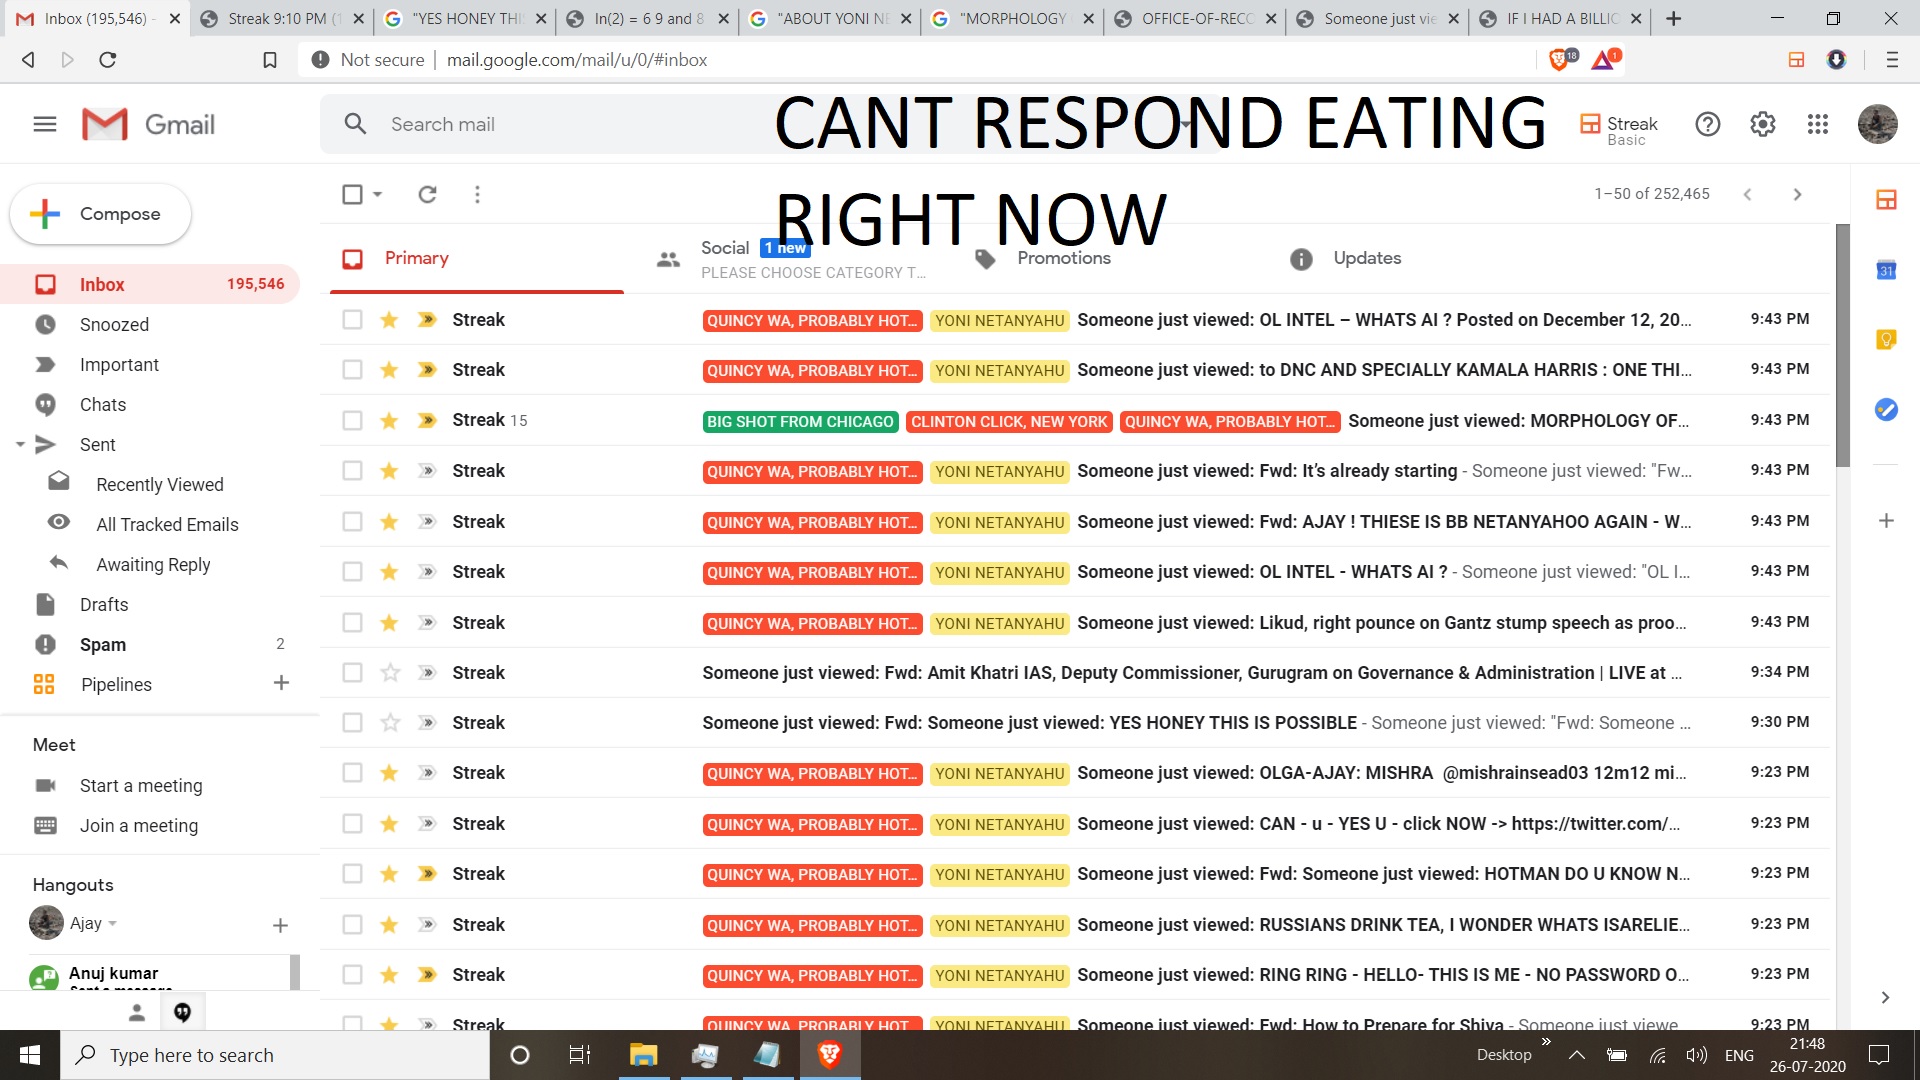 CANT RESPOND EATING RIGHT NOW